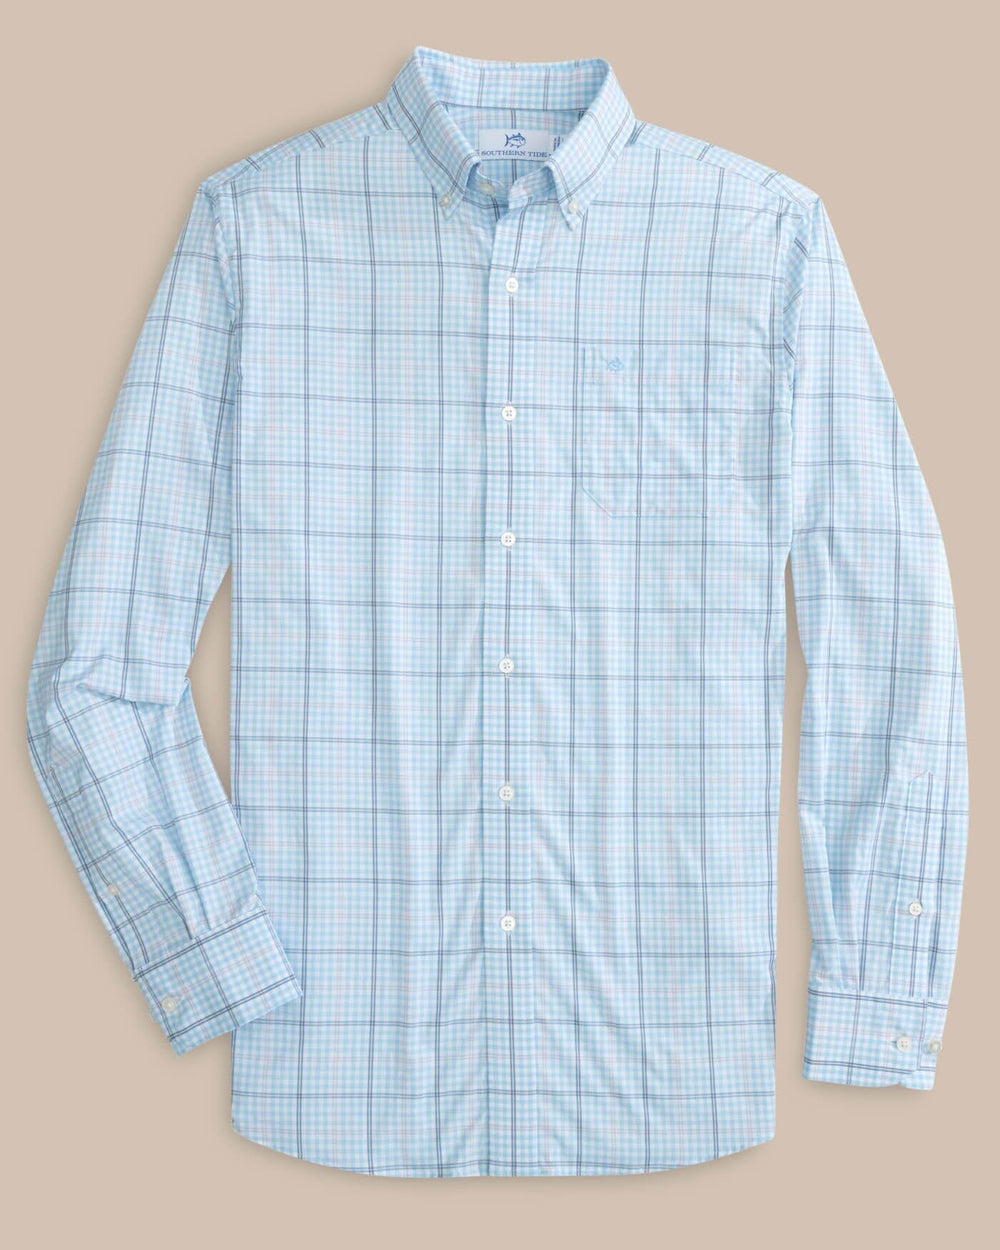 The front view of the Southern Tide brrr Intercoastal Rainer Check Long Sleeve Sportshirt by Southern Tide - Clearwater Blue